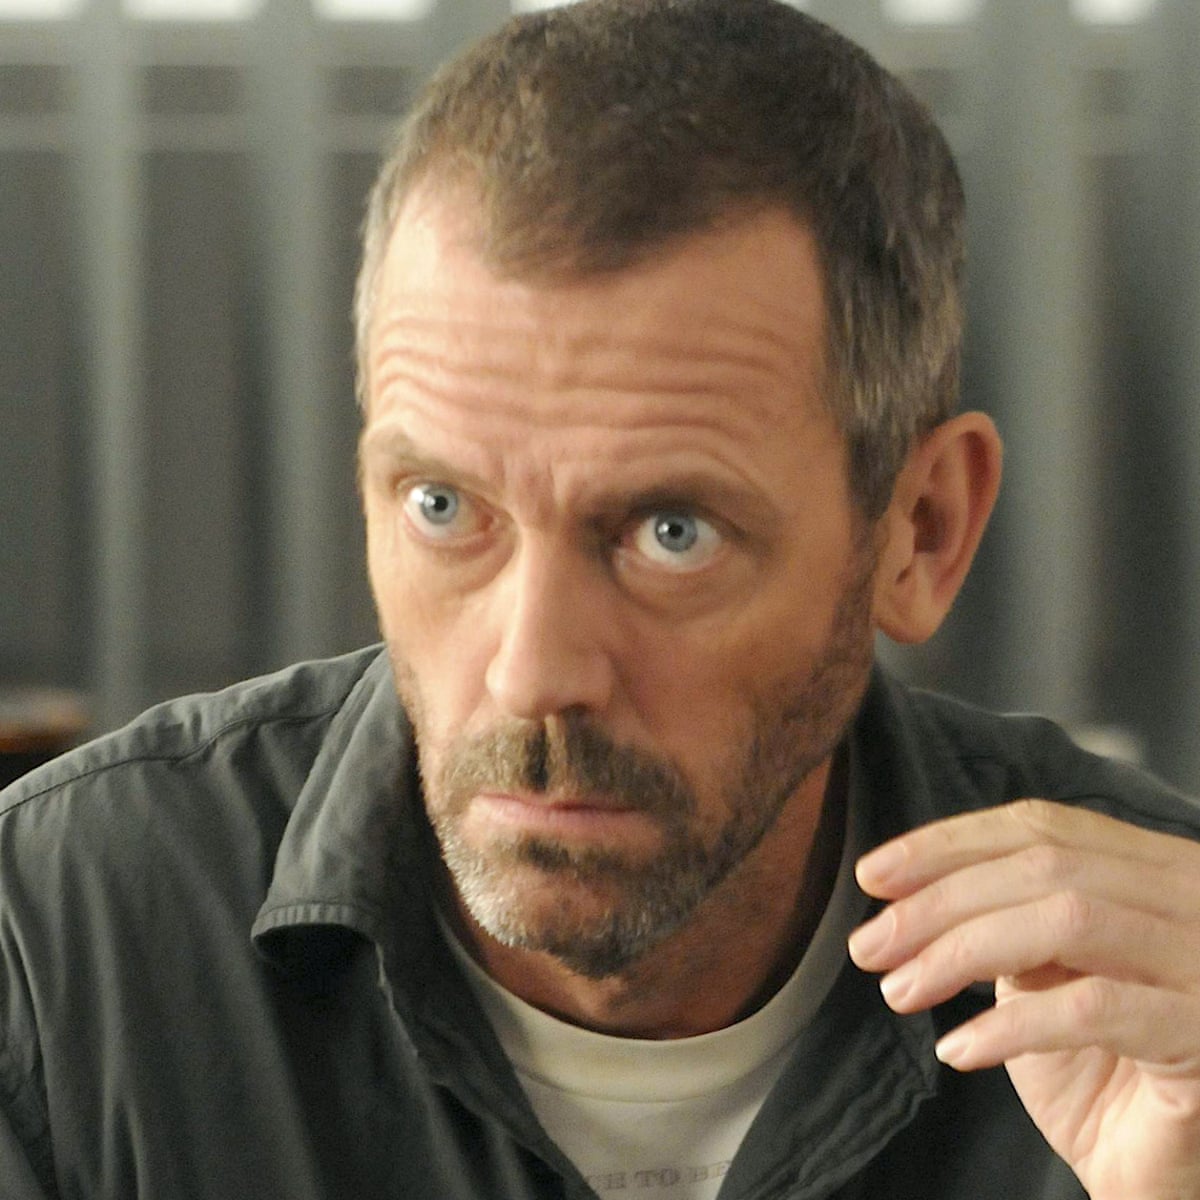 The new doctor: Hugh Laurie takes a Chance on Hulu, Hugh Laurie